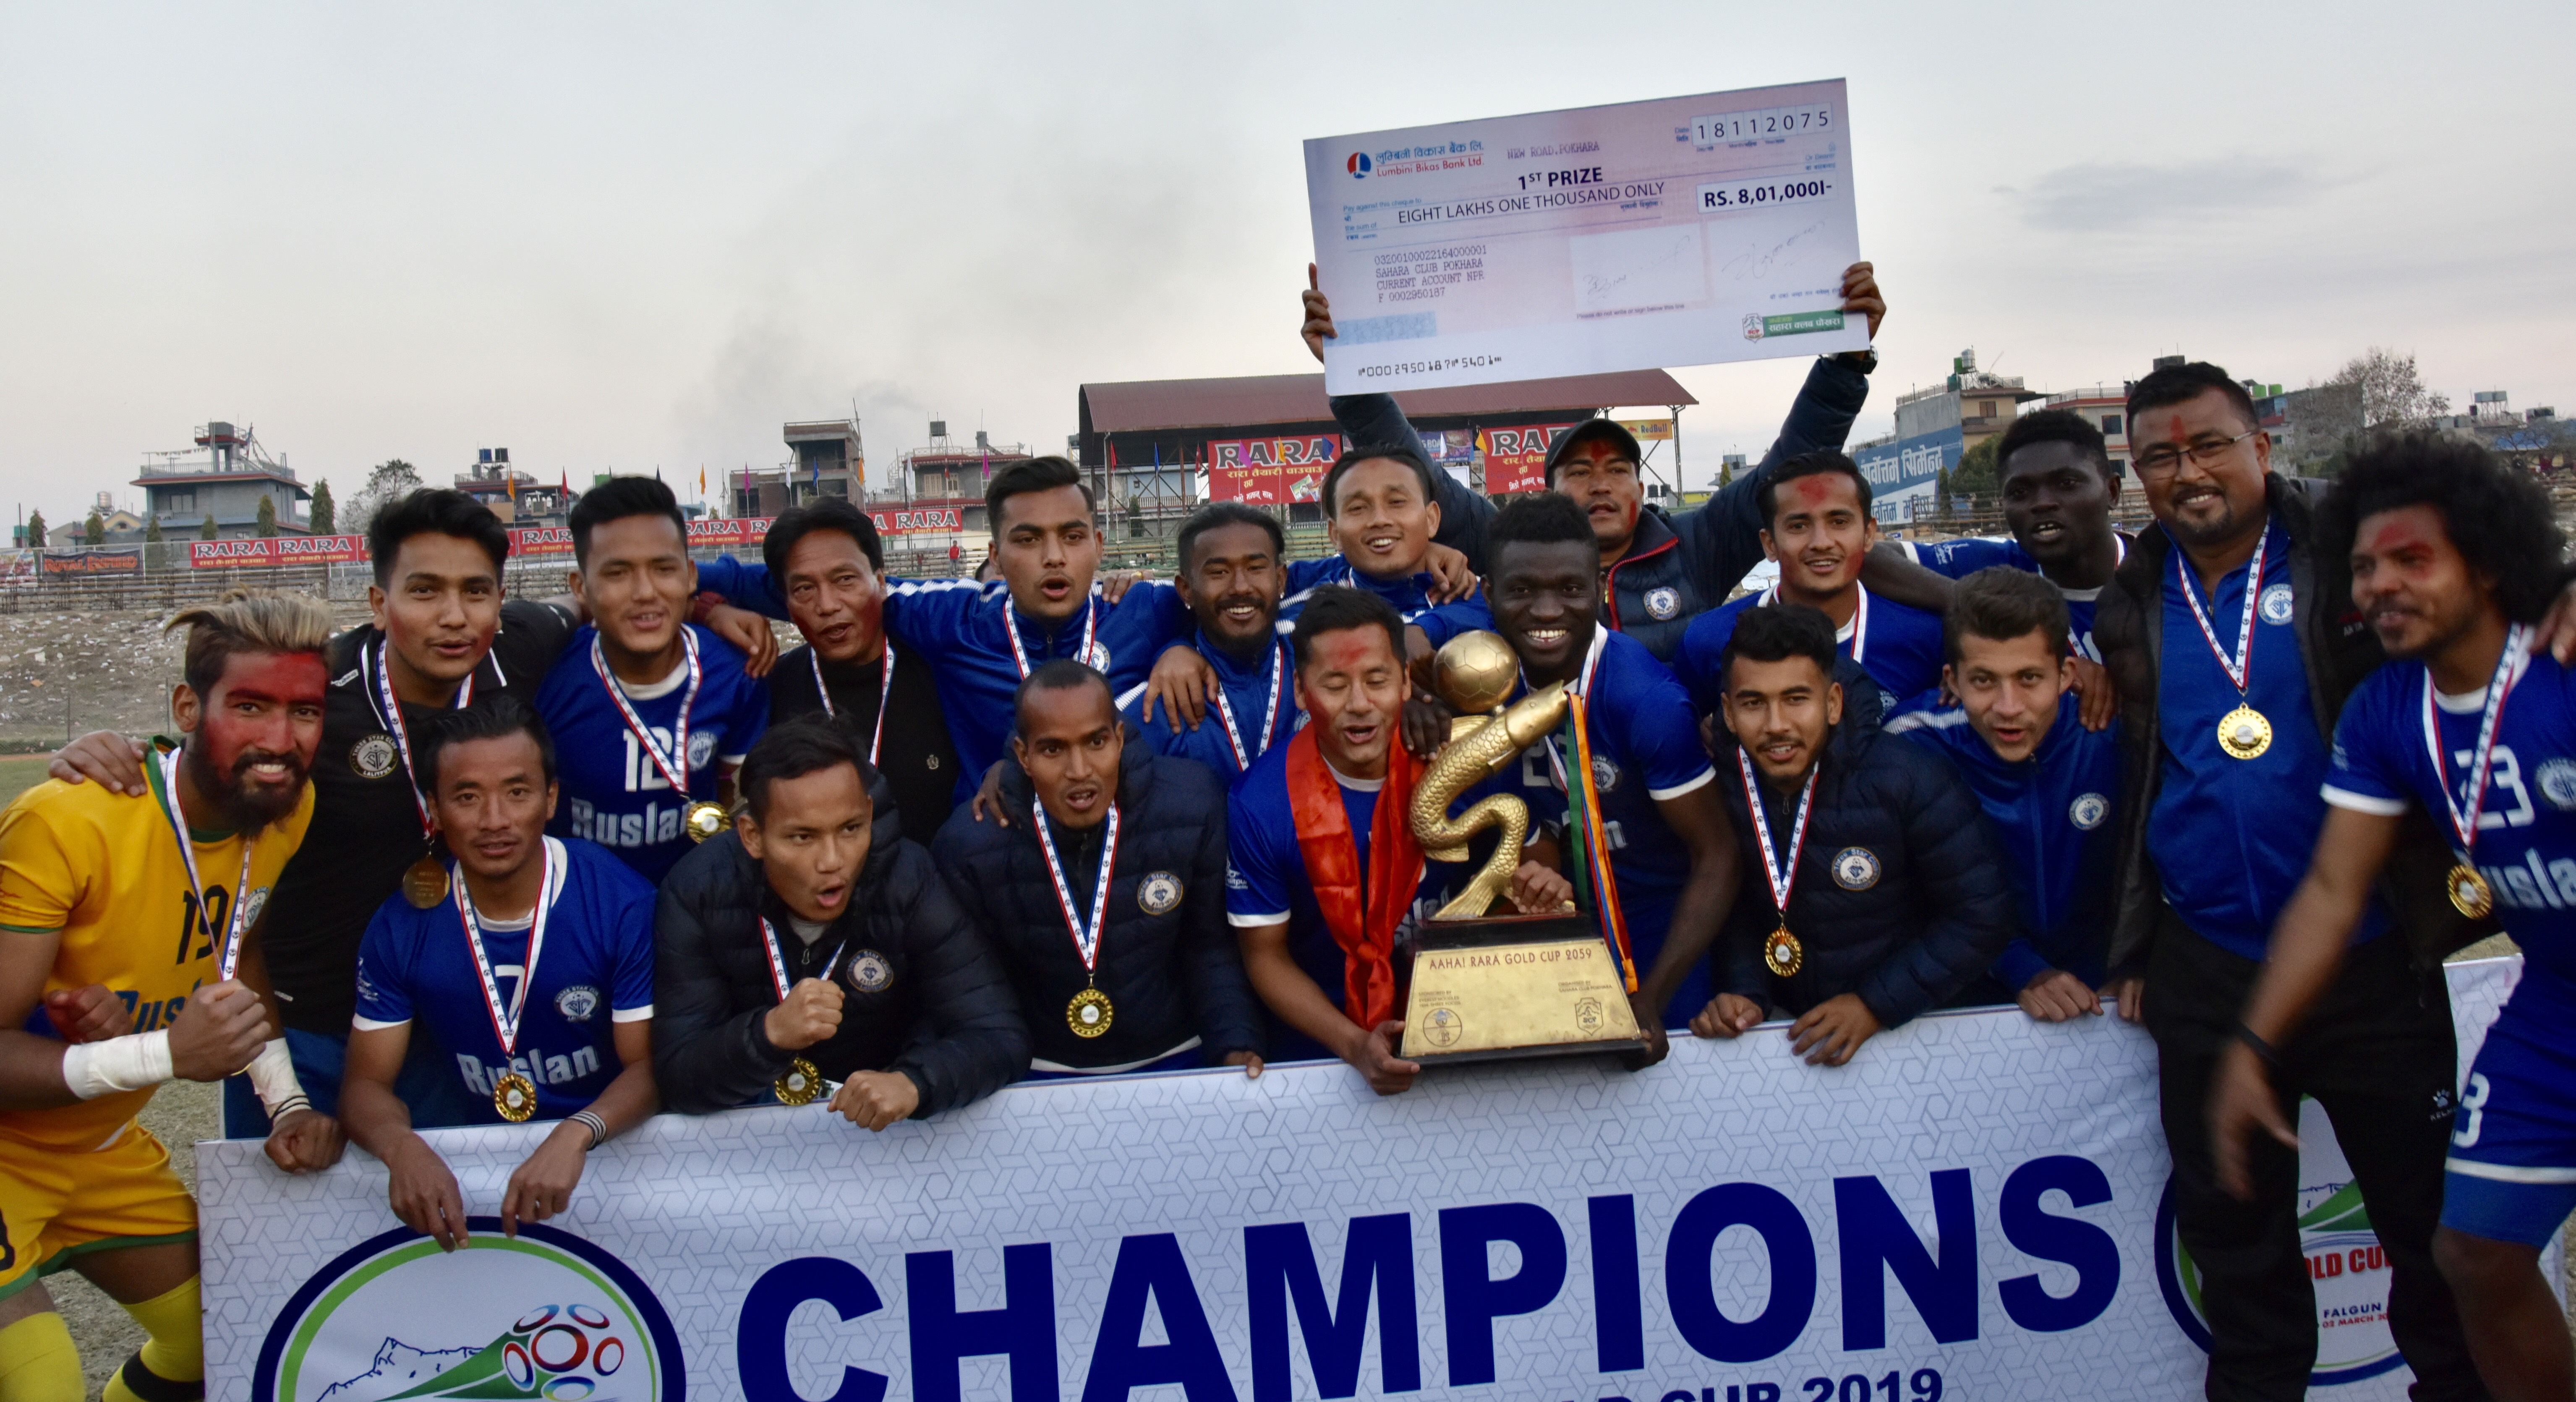 Players and officials of Ruslan Three Star Club celebrate after winning the 17th Aaha Rara Gold Cup in Pokhara on Saturday. Photo: THT